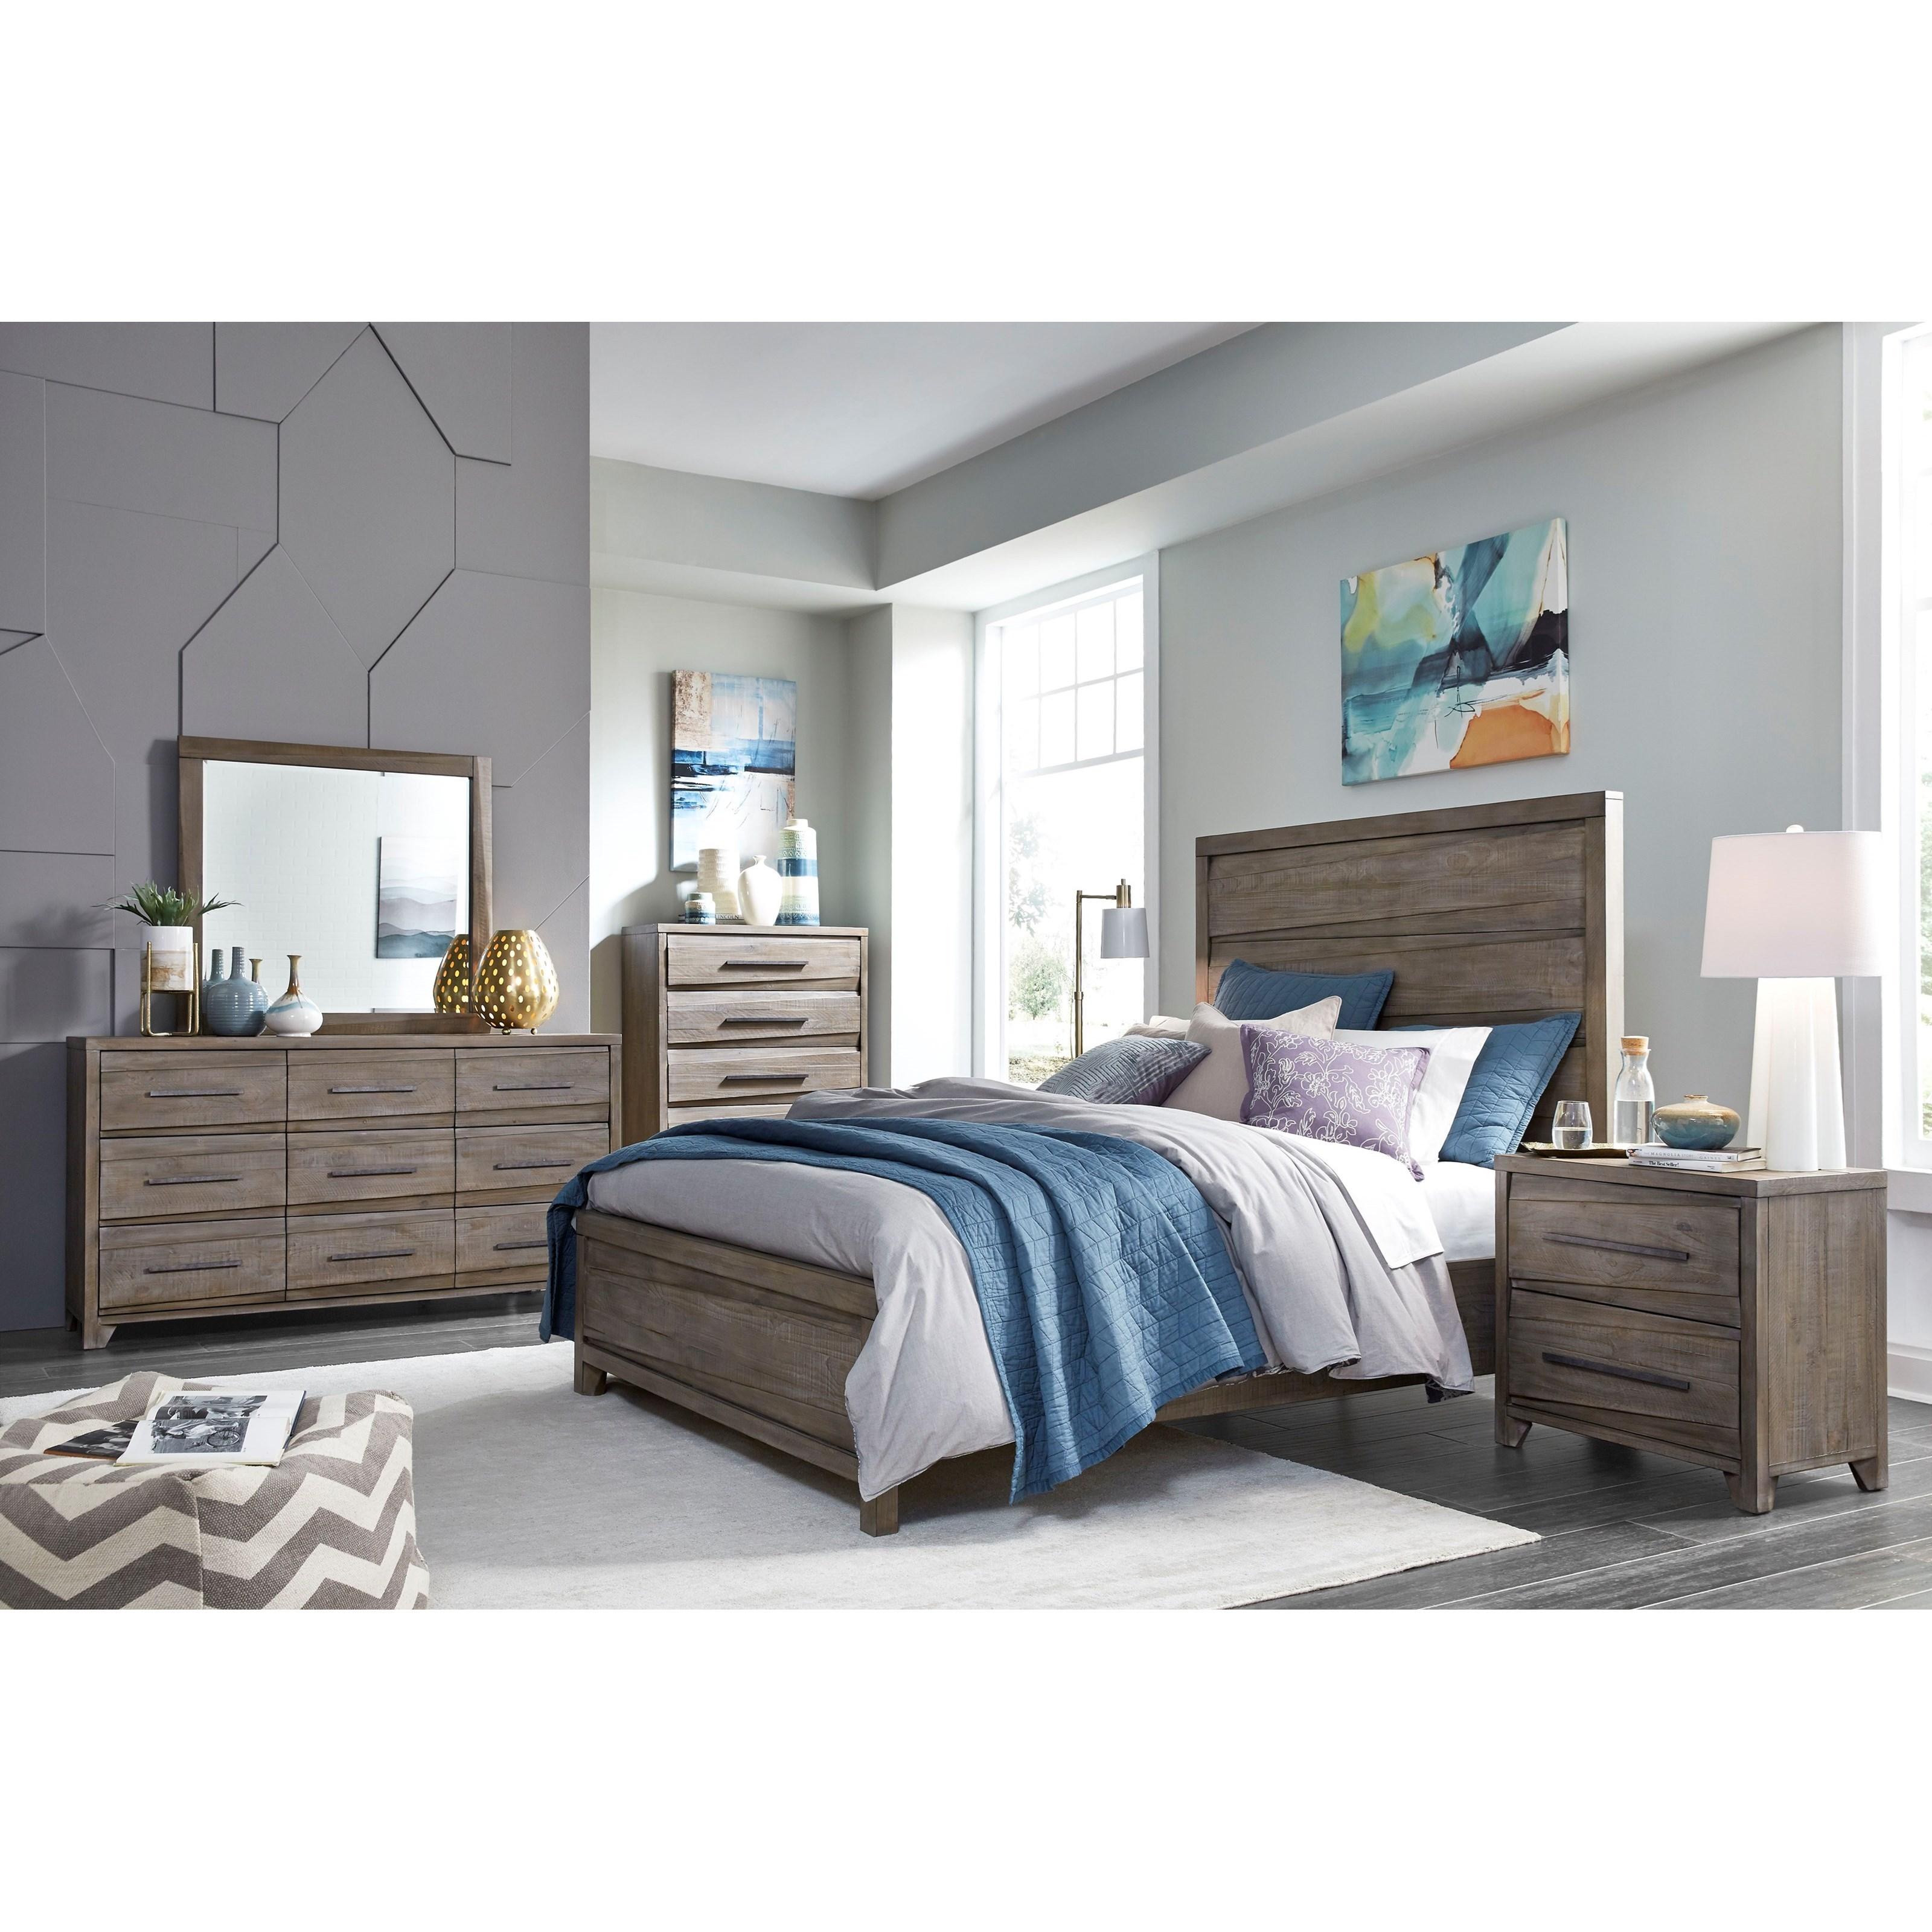 Casual, Rustic Panel Bedroom Set HEARST 6VF3A7-NDM-4PC in Tan 